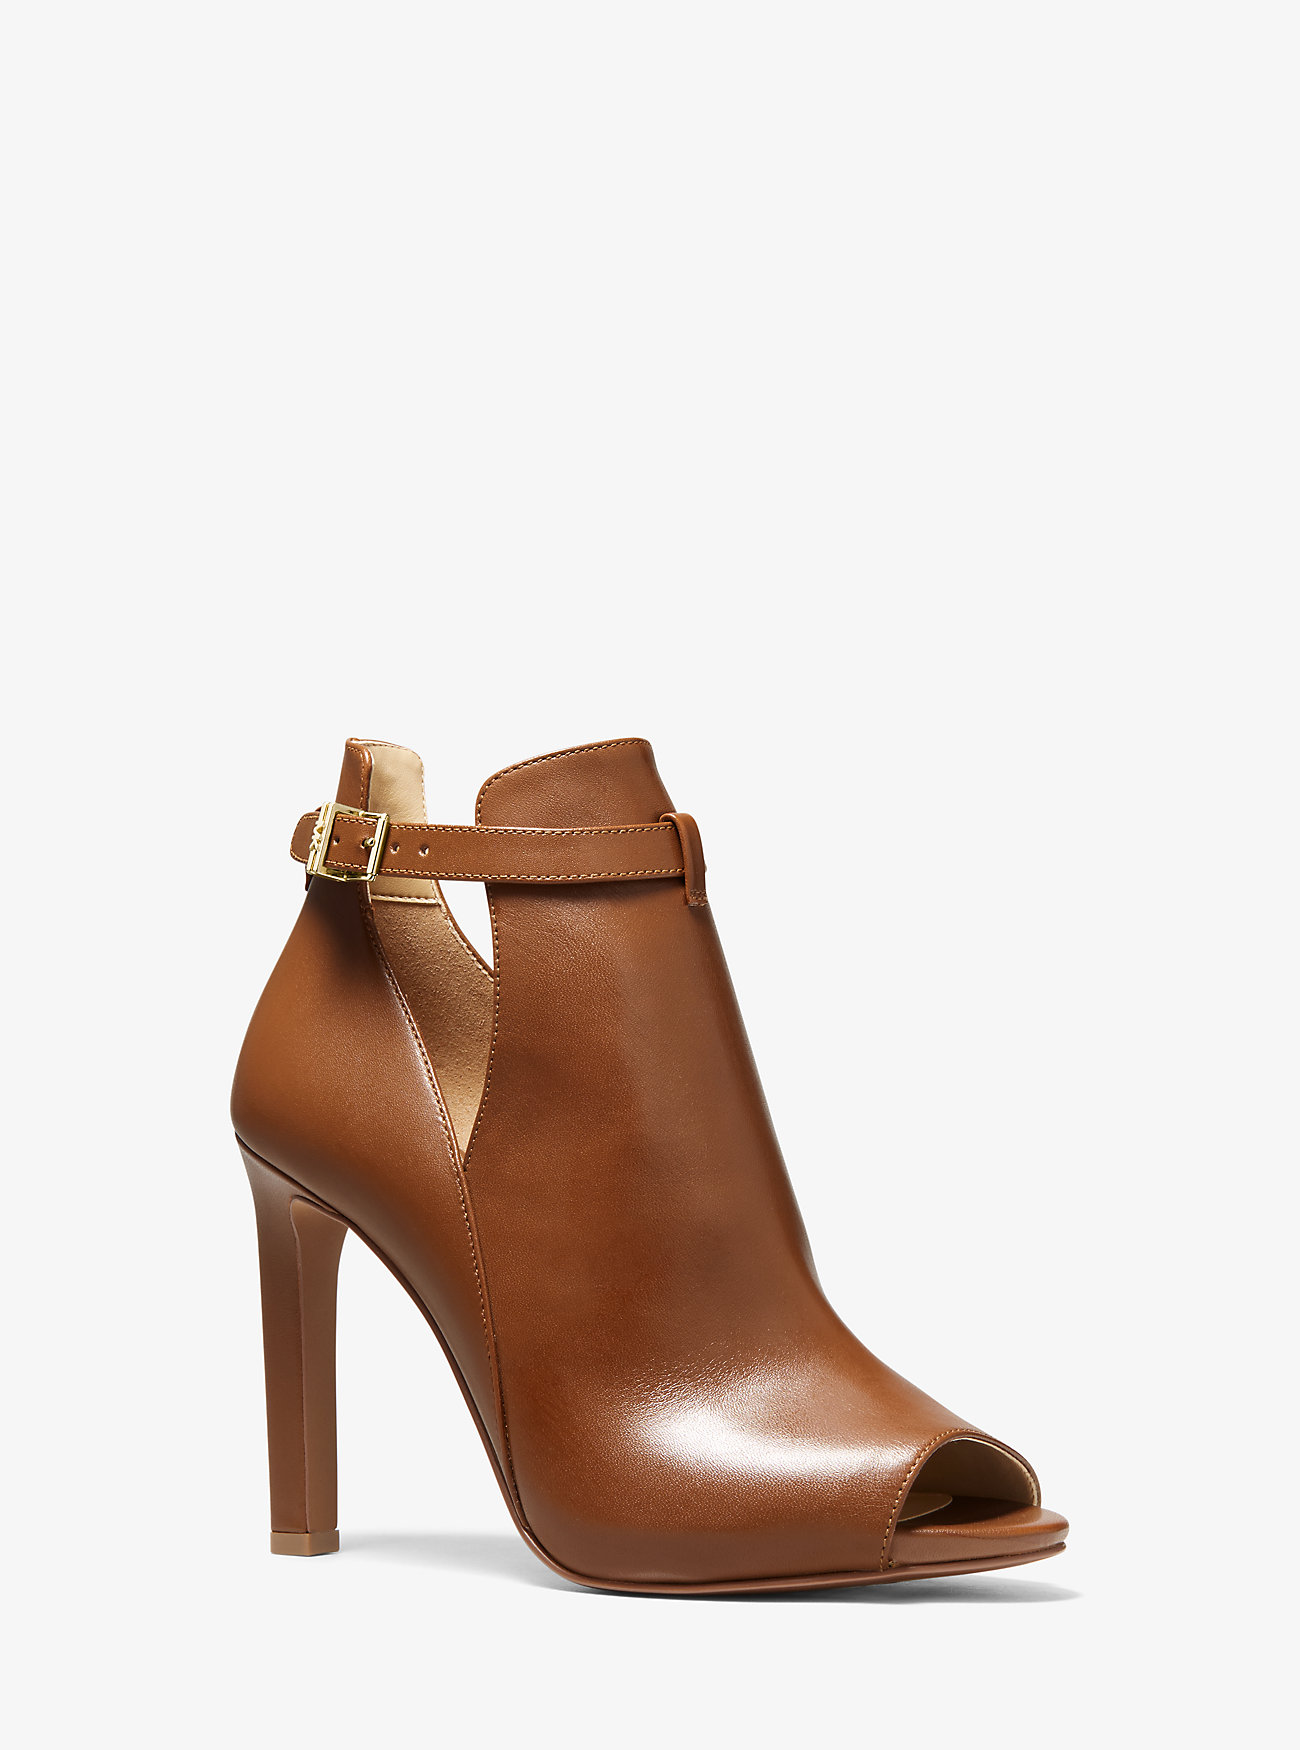 Michaelkors Lawson Leather Open-Toe Ankle Boot